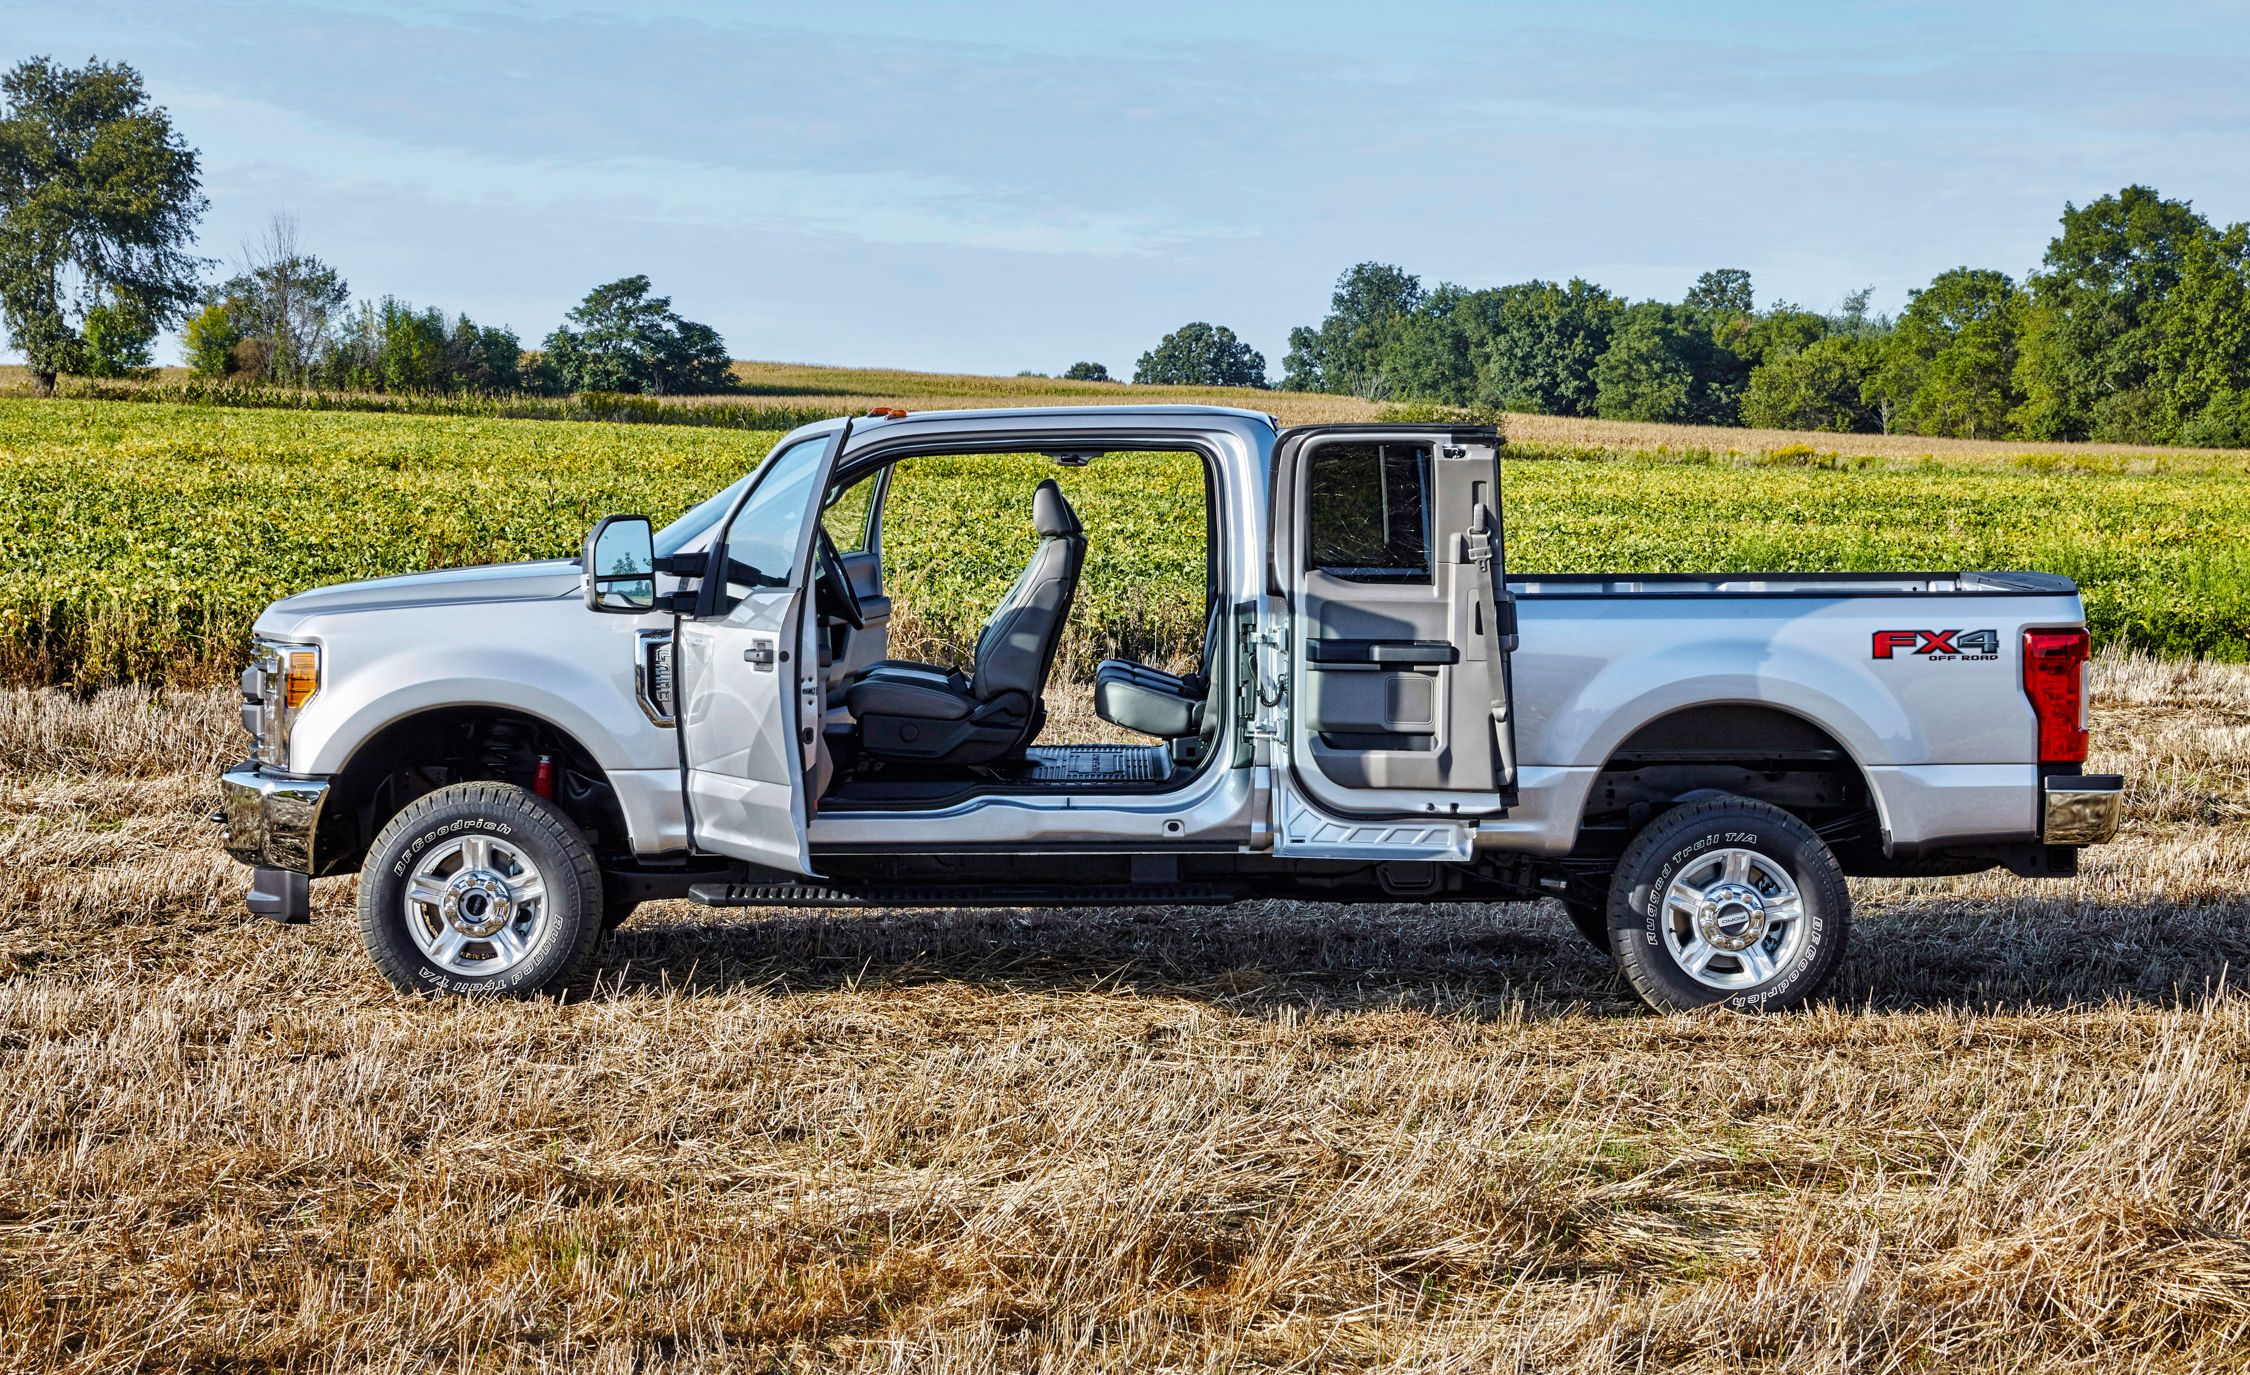 2017 ford f250 vs f350 towing capacity